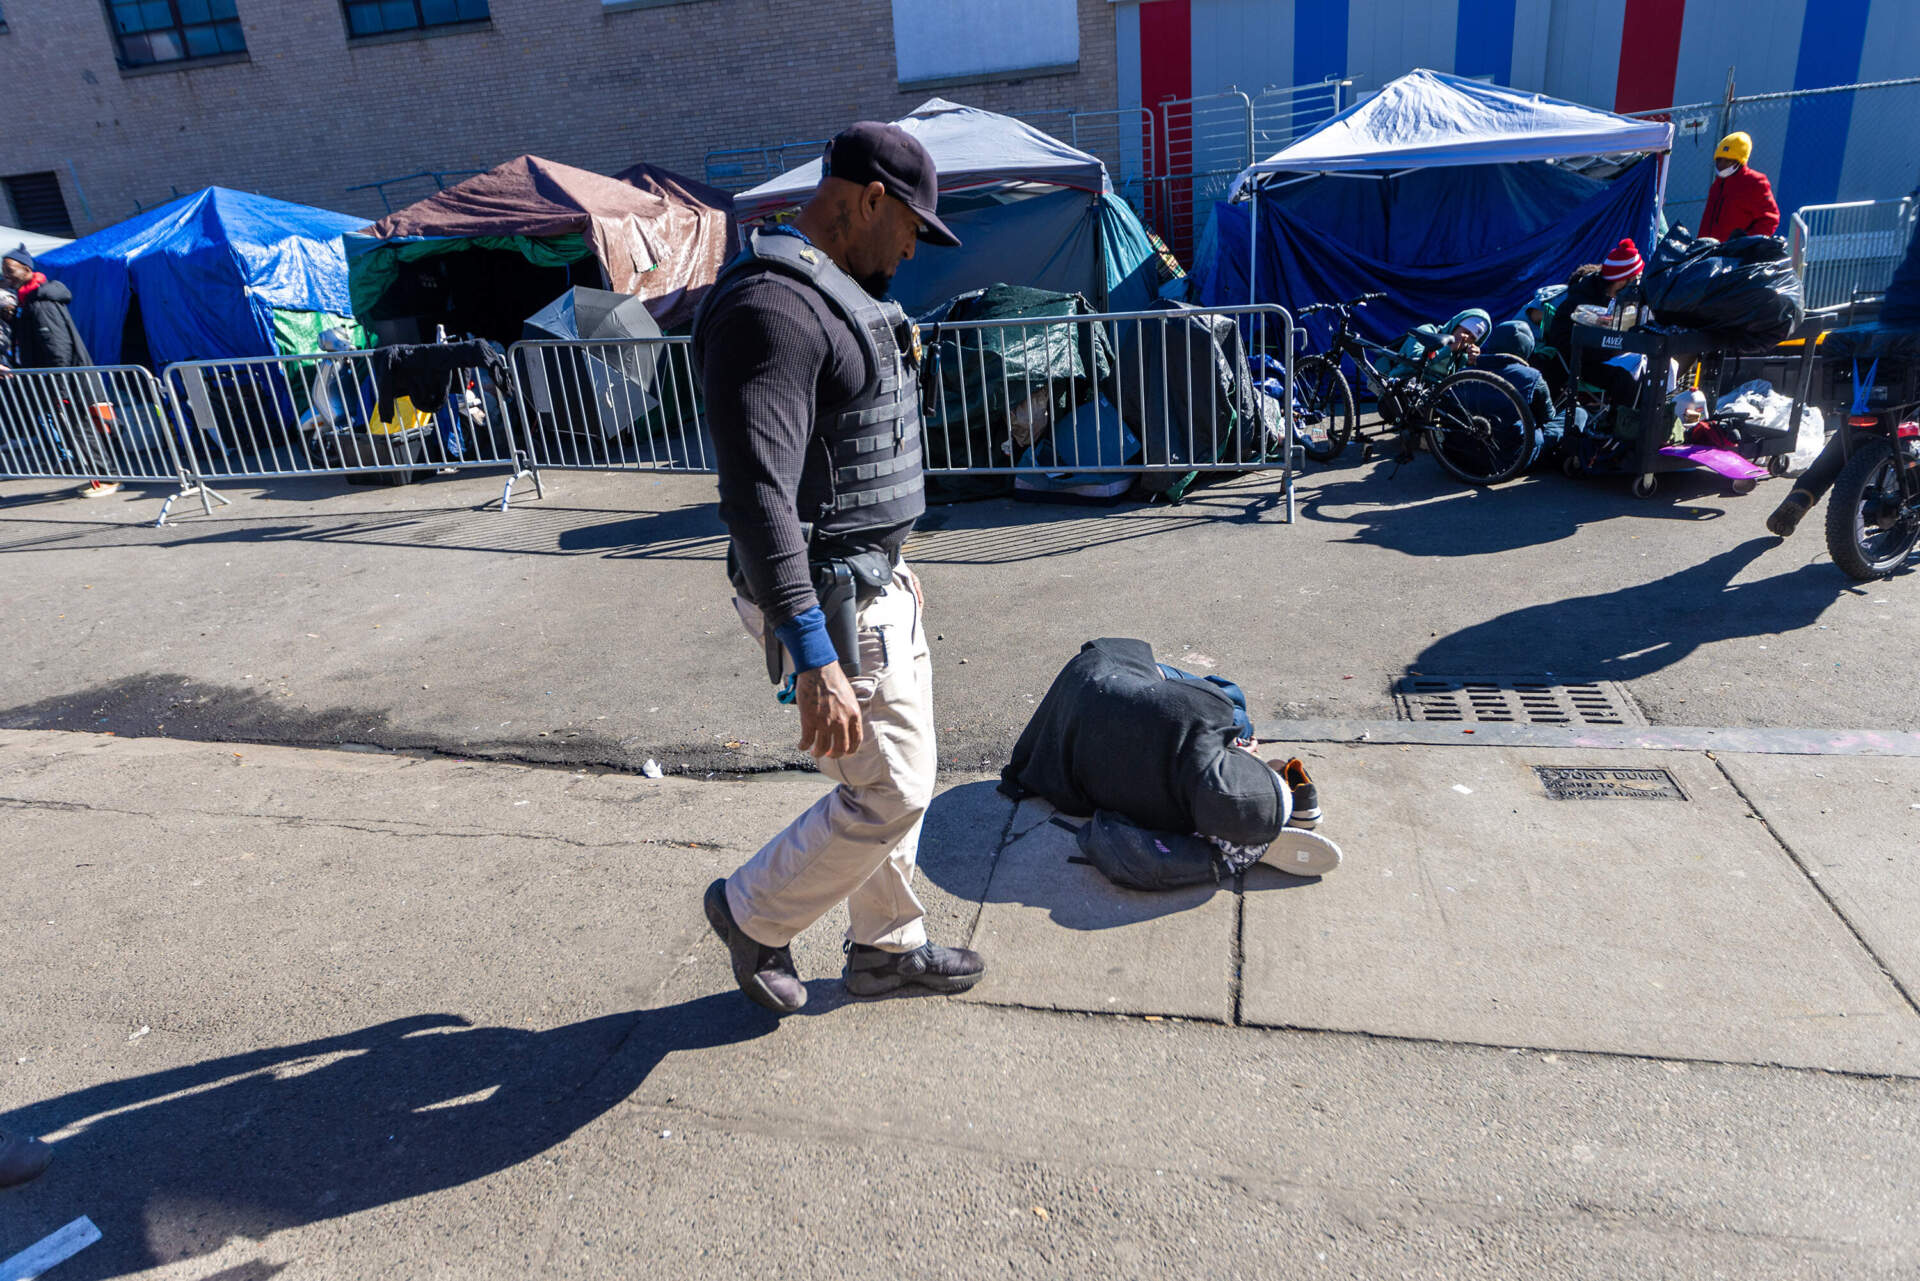 Security guard Victor Arias looks at a person passed out on the sidewalk of Atkinson Street while patrolling the area. (Jesse Costa/WBUR)